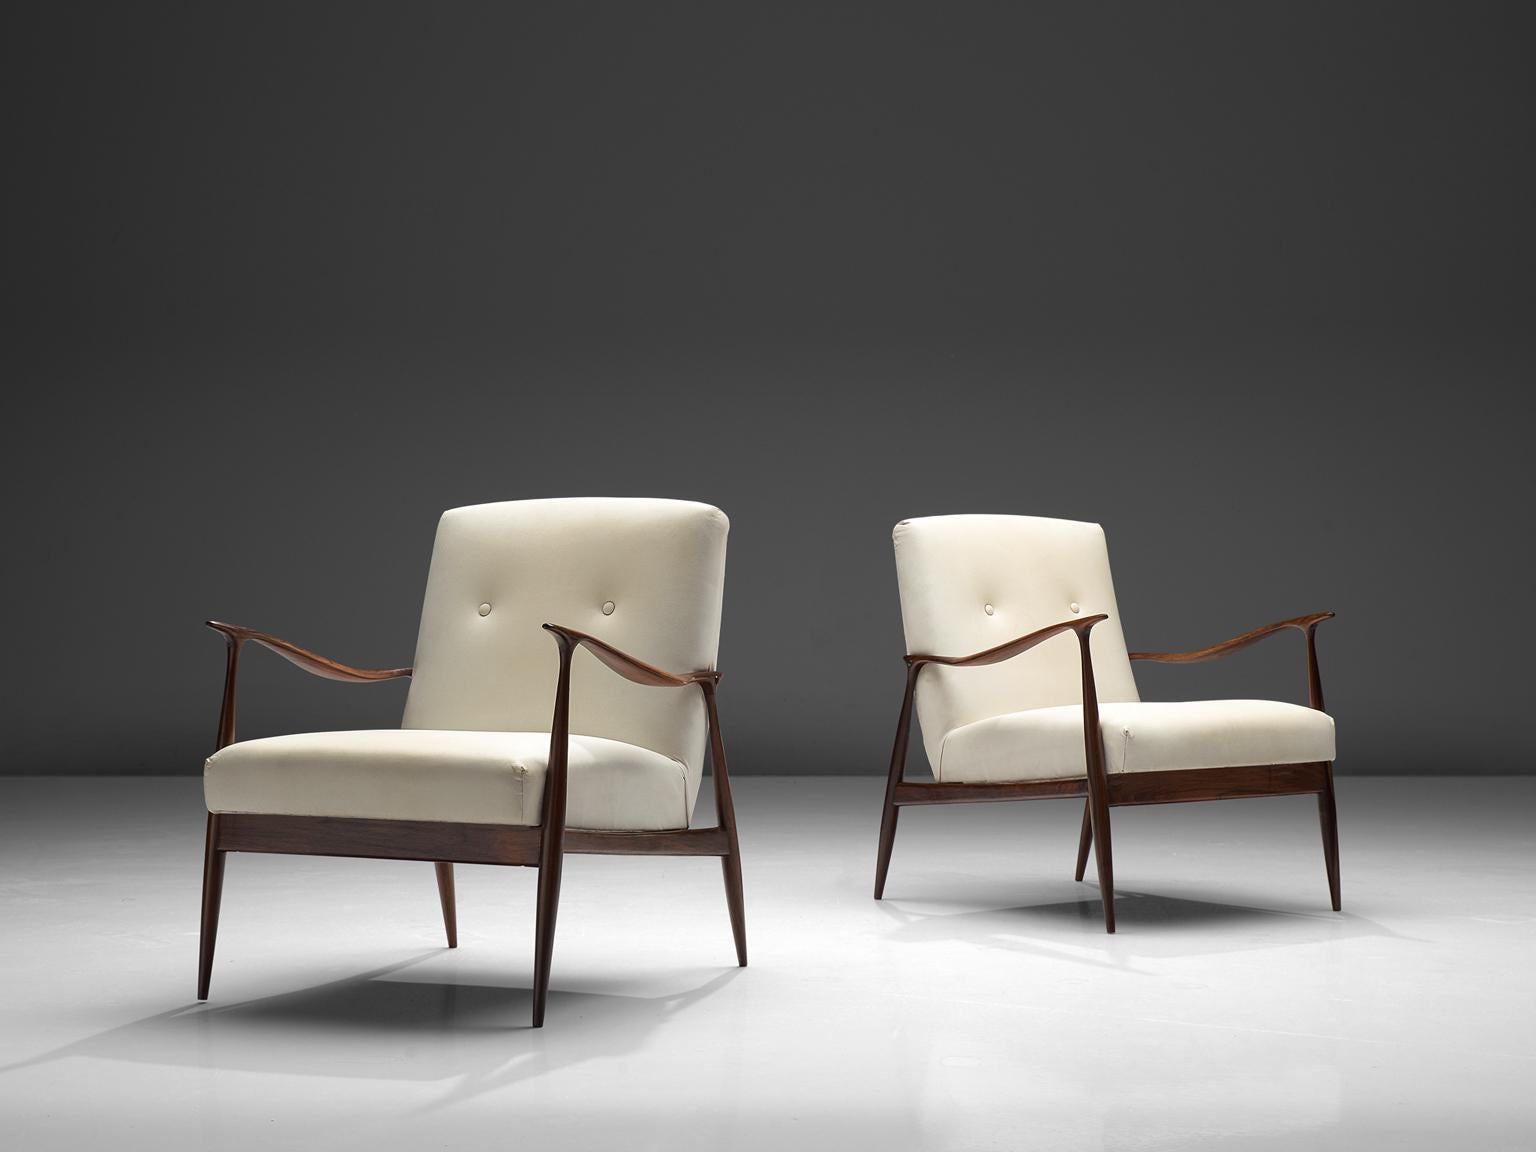 Giuseppe Scapinelli, set of 2 'Paltrona' armchairs, rosewood and leatherette, Brazil, 1950s.

Elegant pair of easy chairs by Brazilian designer Giuseppe Scapinelli. This chair in Caviuna wood exposes the beautiful grain of the wood in an eloquent